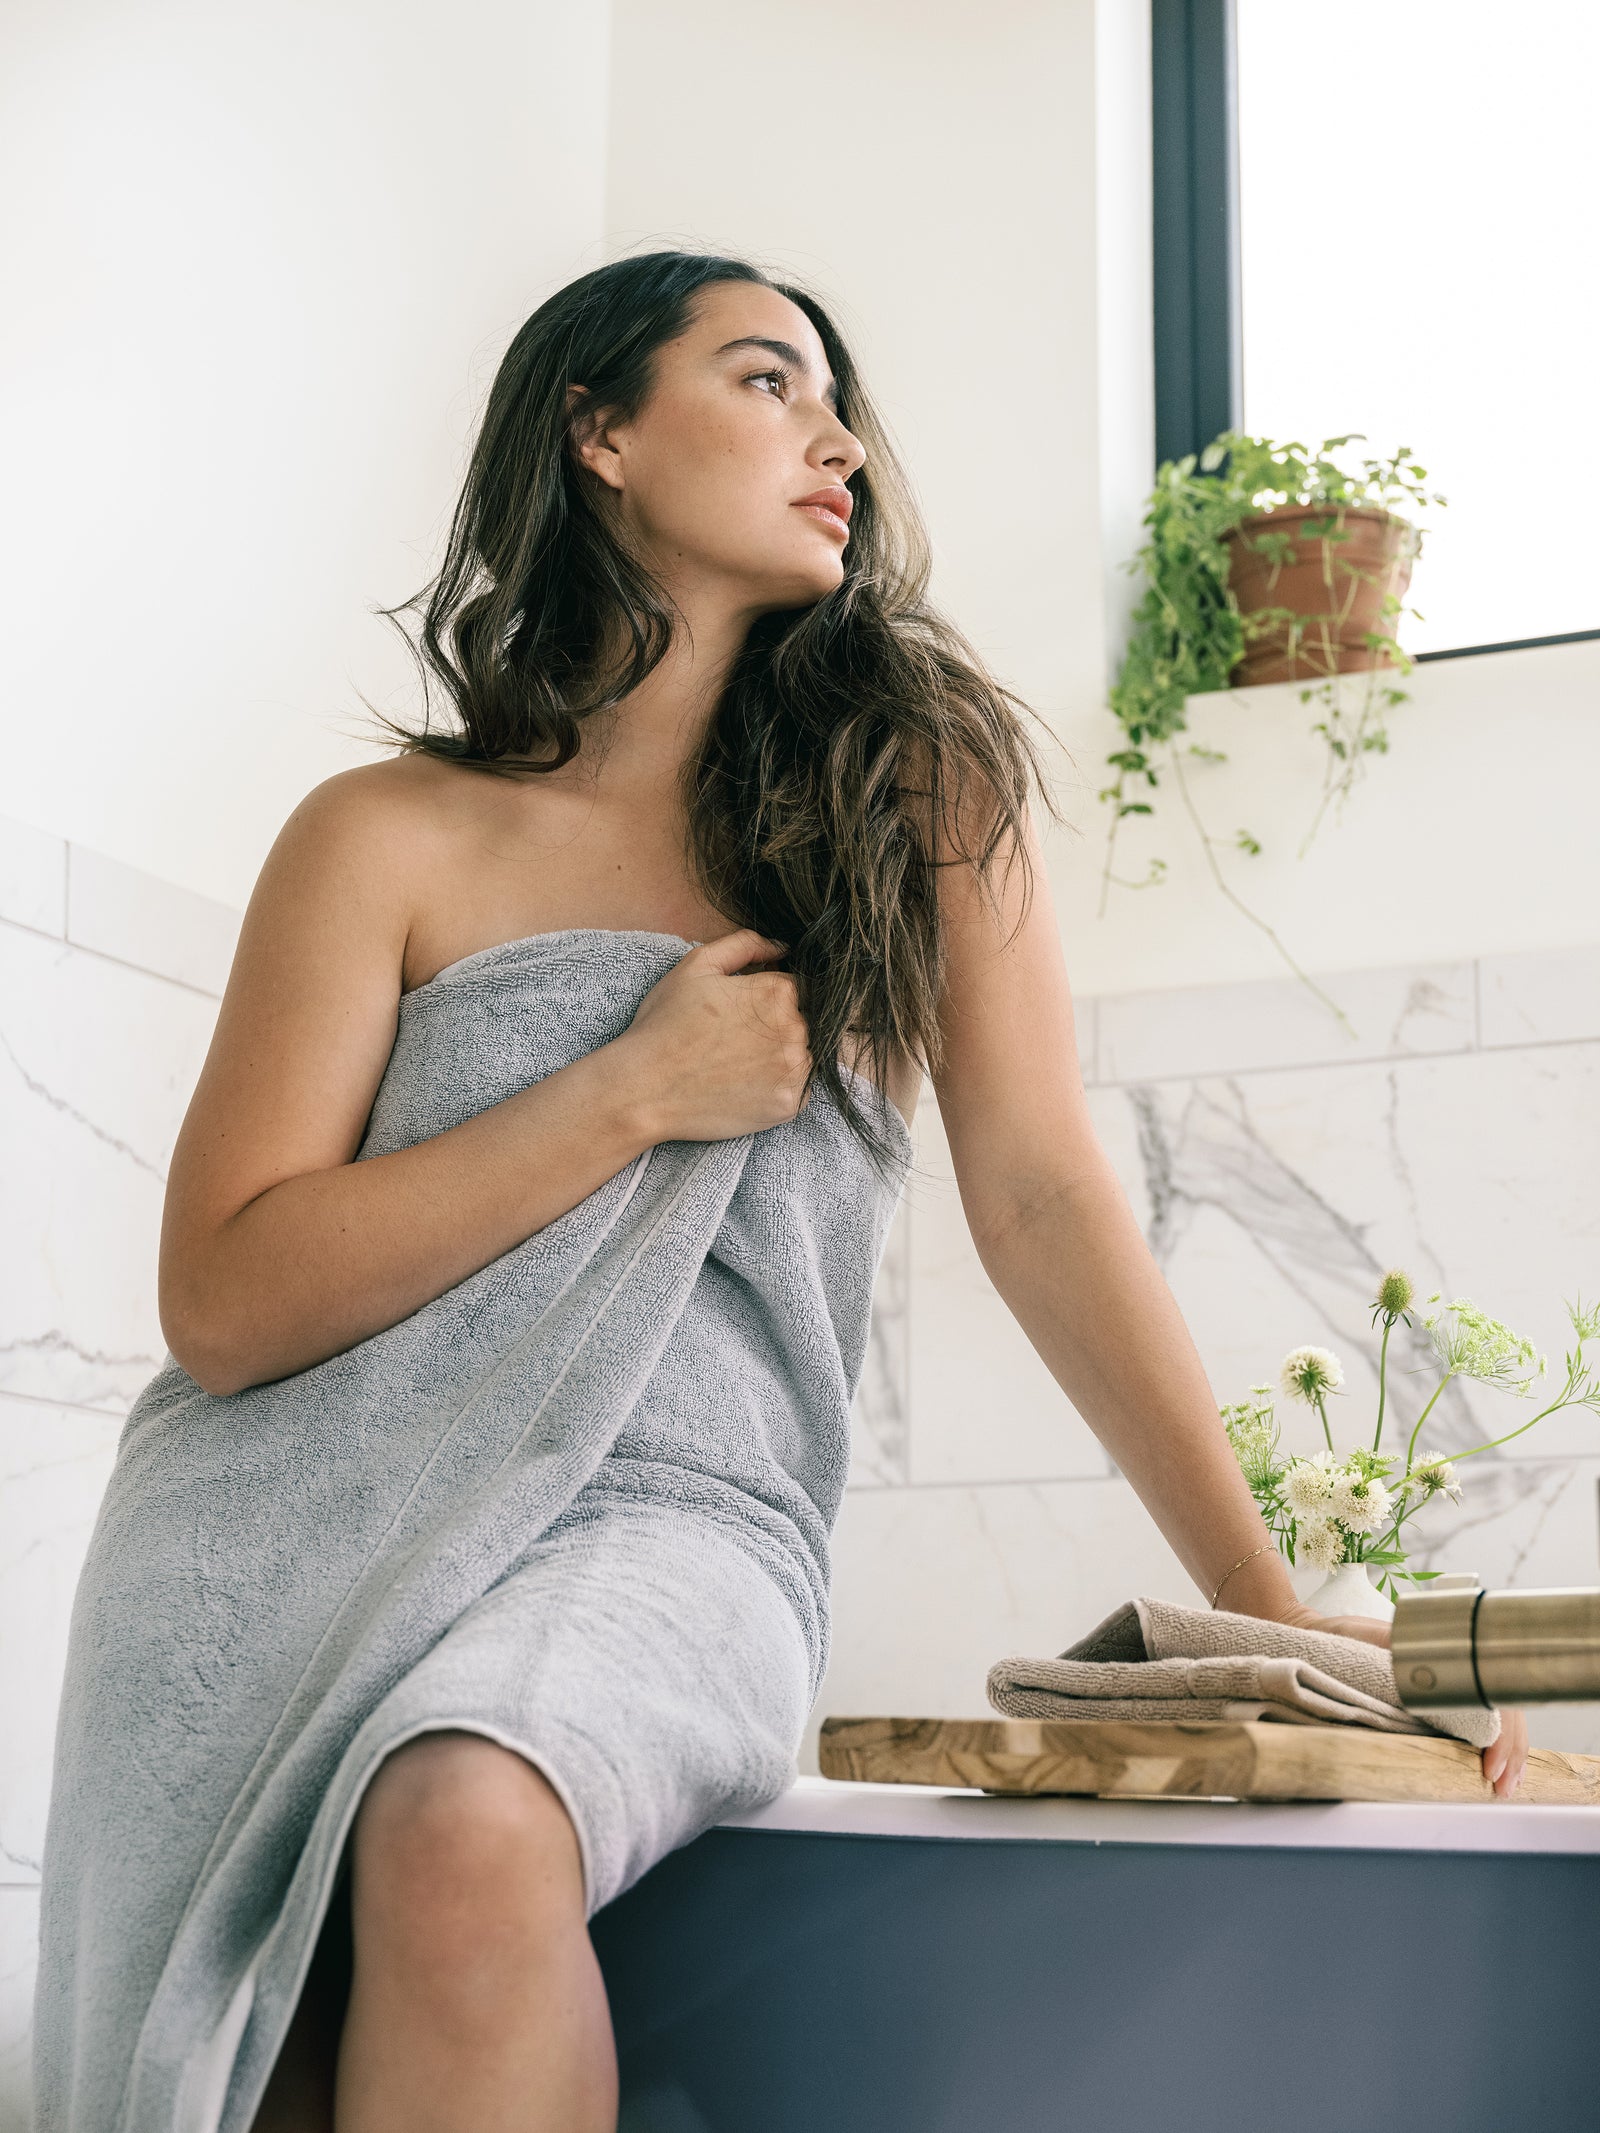 Premium Plush Bath Towel in the color Harbor Mist. Photo of Harbor Mist Premium Plush Bath Towel taken in a bathroom with a white tile backsplash. There is a brunette woman holding the towel close to her body as she sits on the bathtub. 